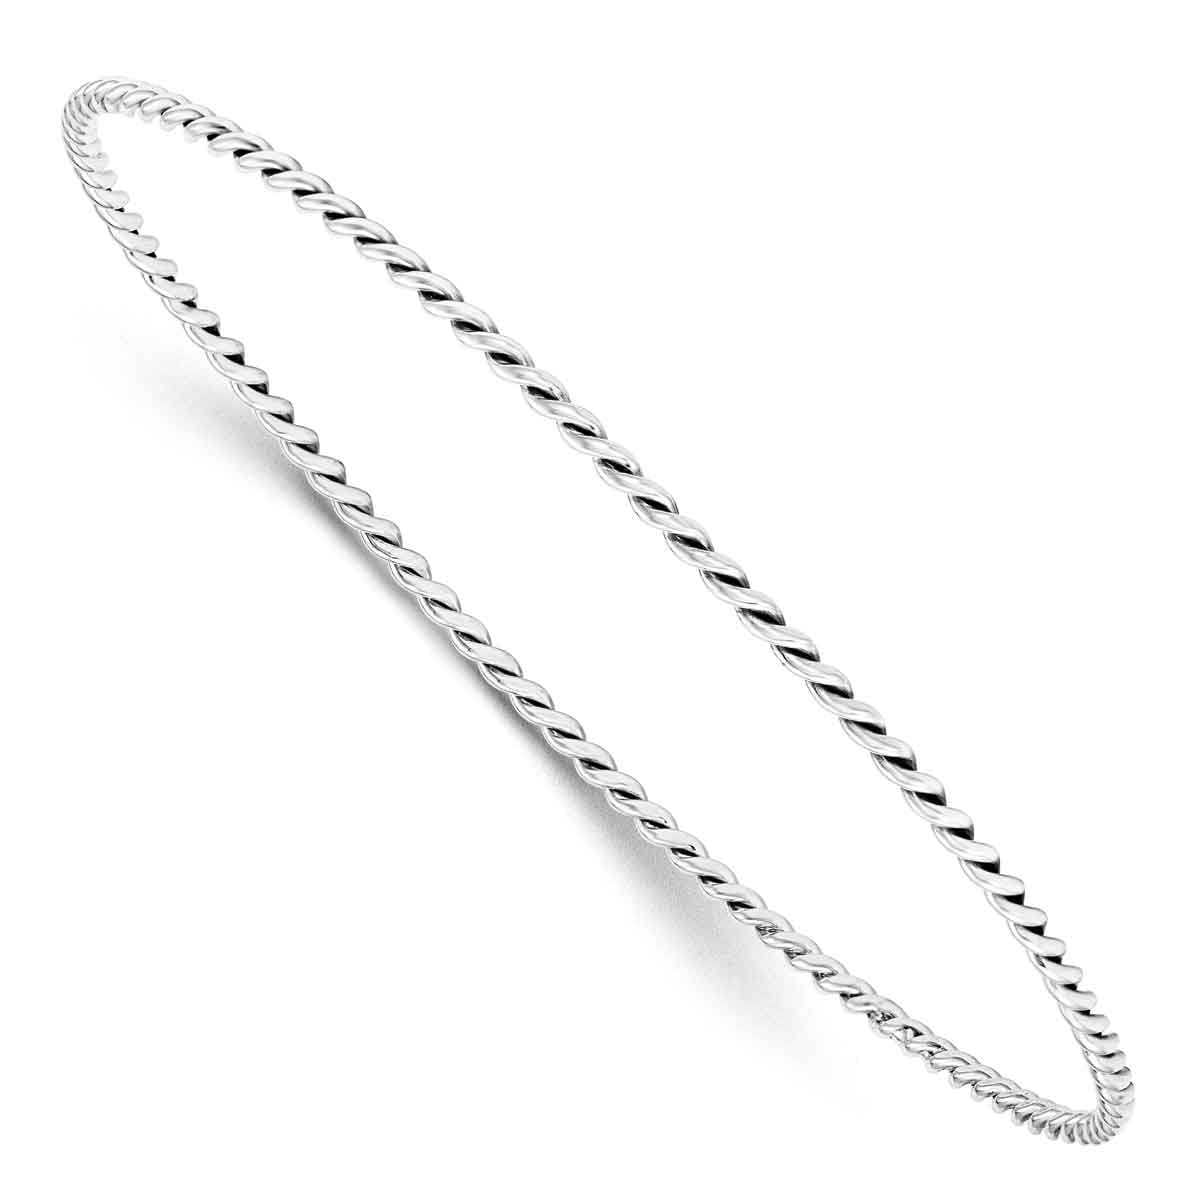 FB Jewels Solid 925 Sterling Silver Antiqued 3.5mm Twisted Weave Slip-On Bangle